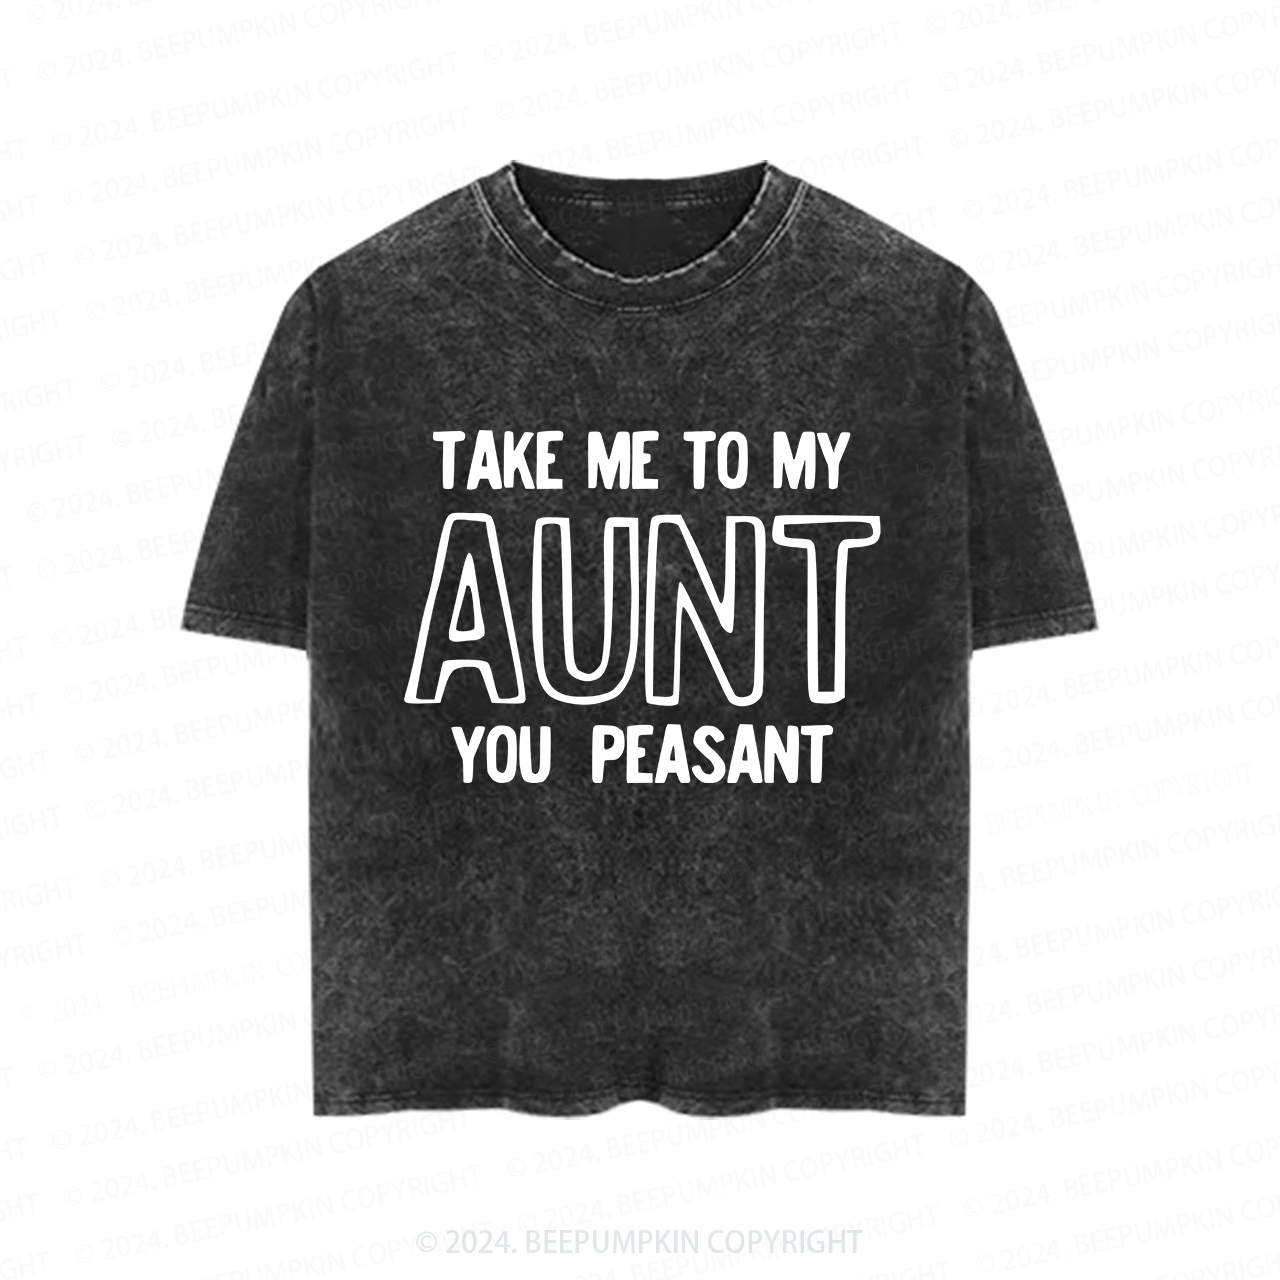 Take Me To My Aunt You Peasant Toddler&Kids Washed Tees